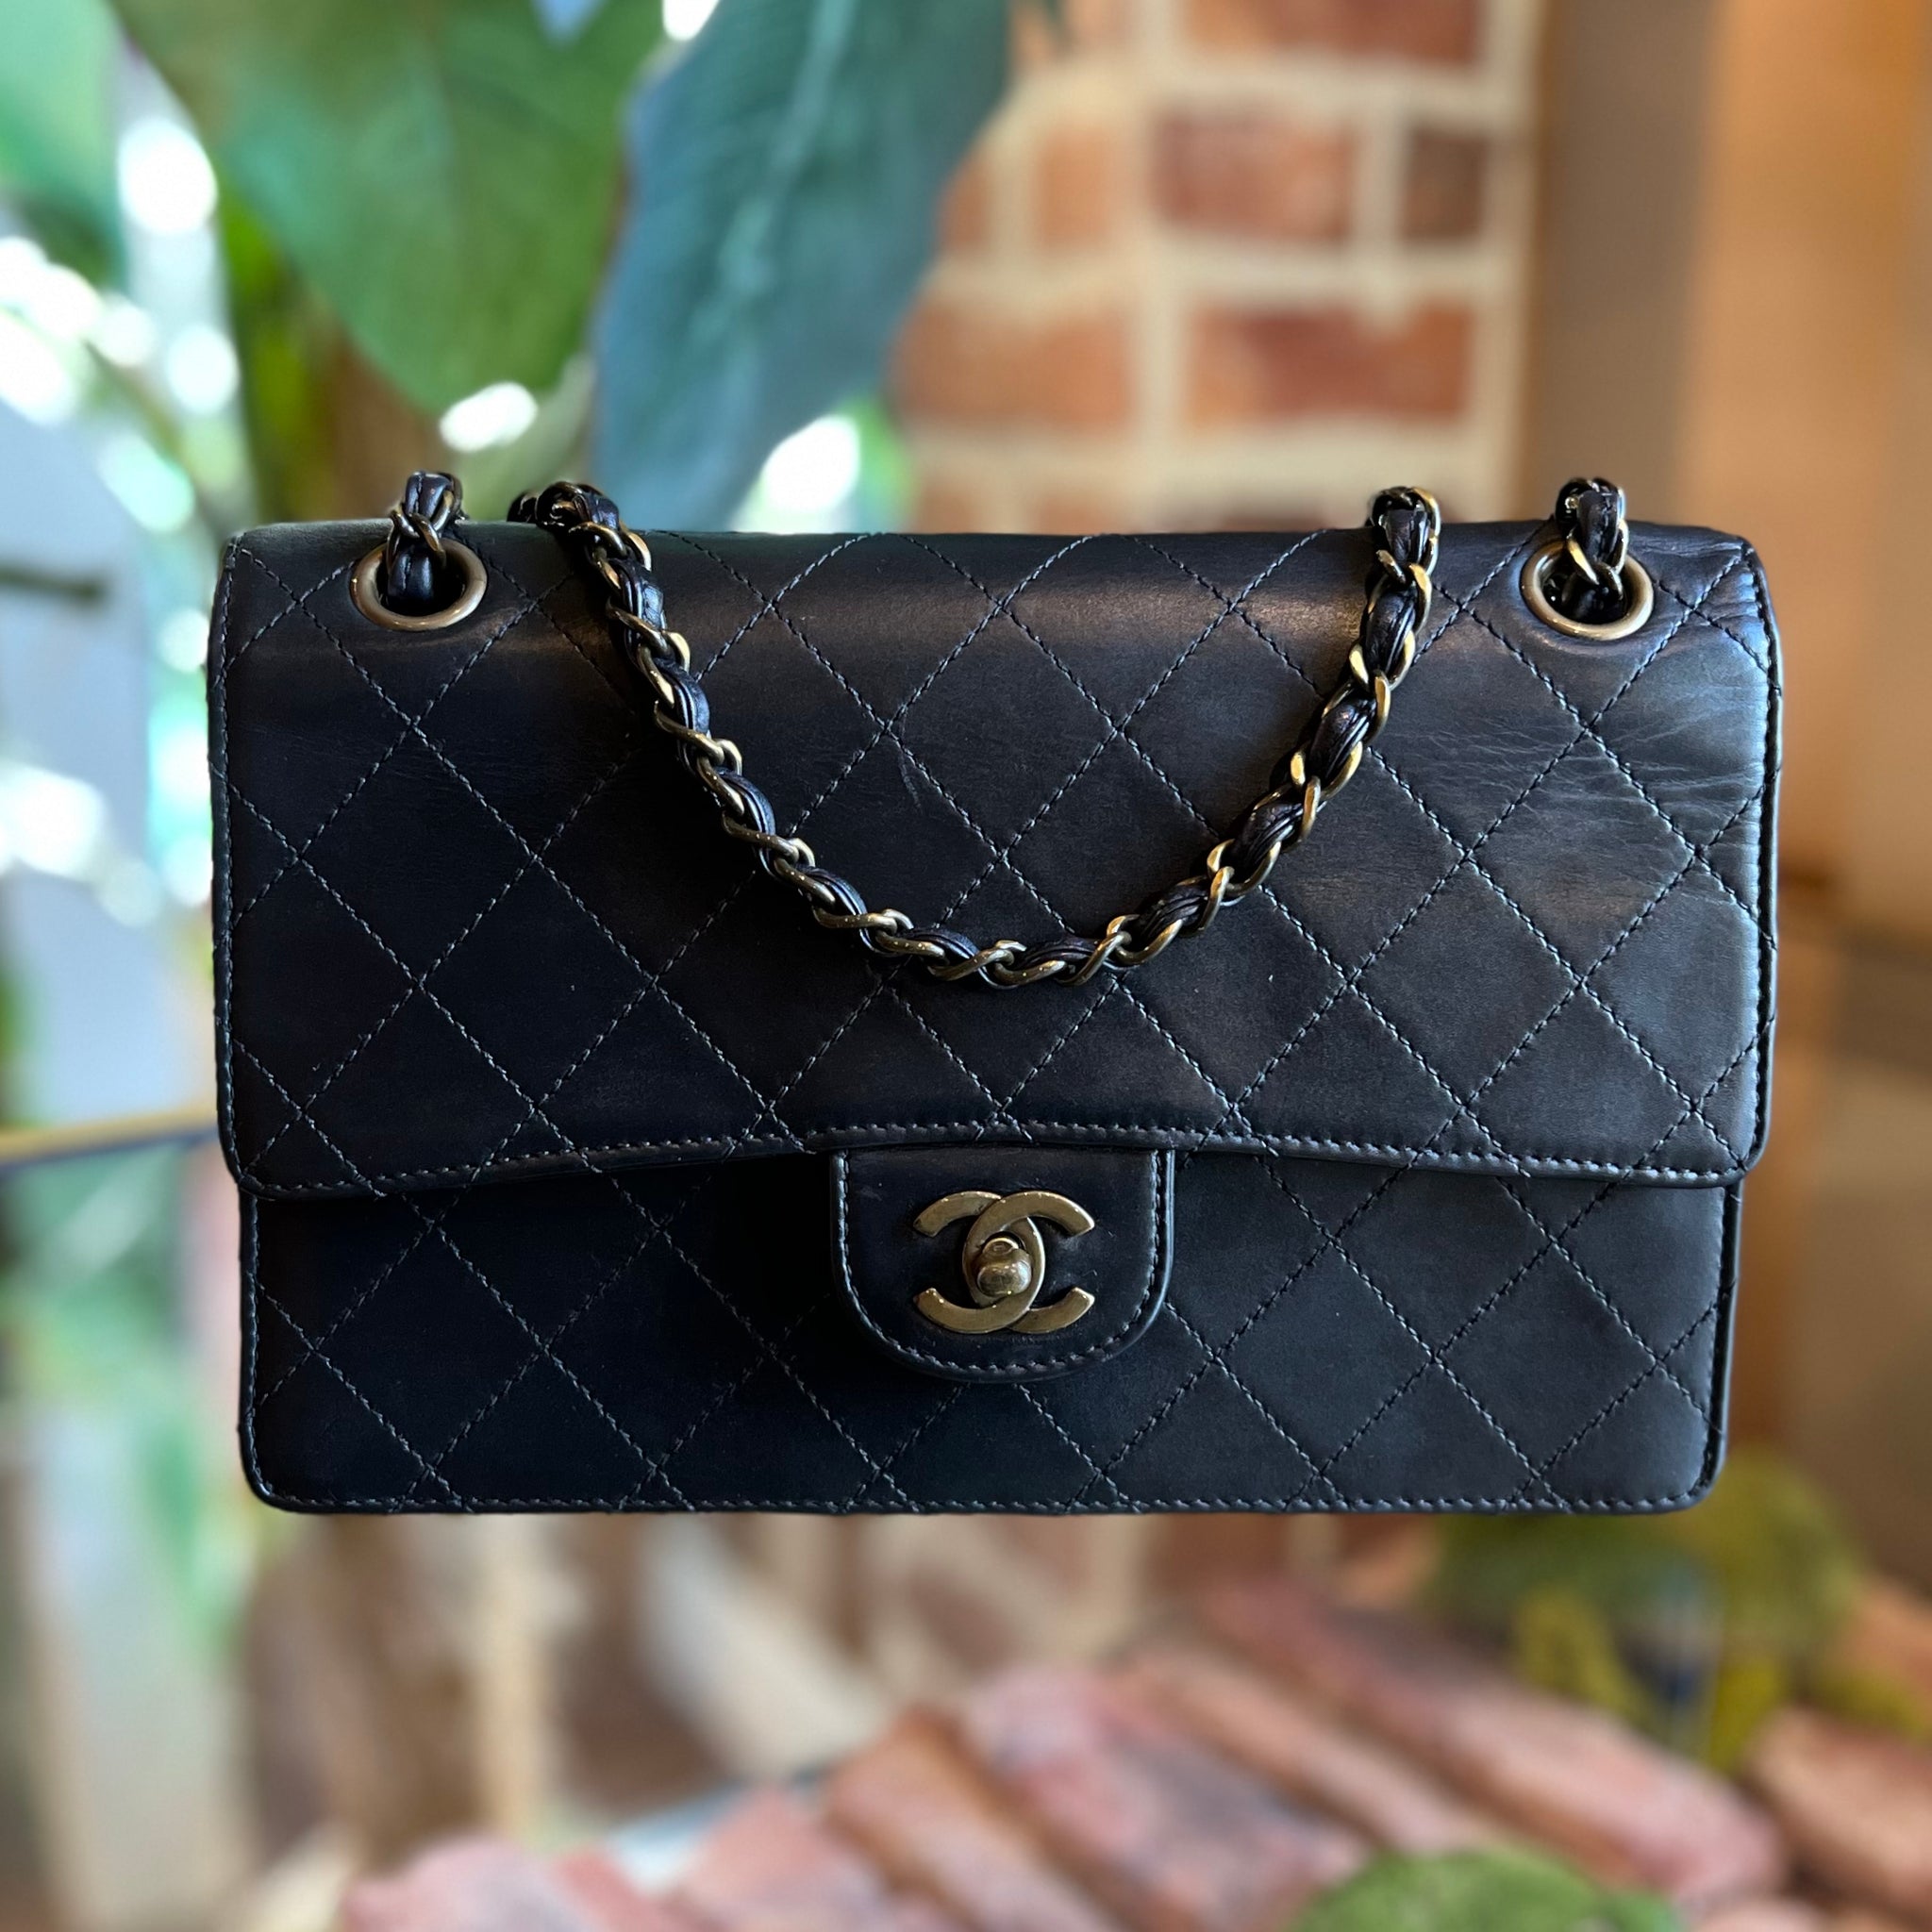 quilting chanel black purse